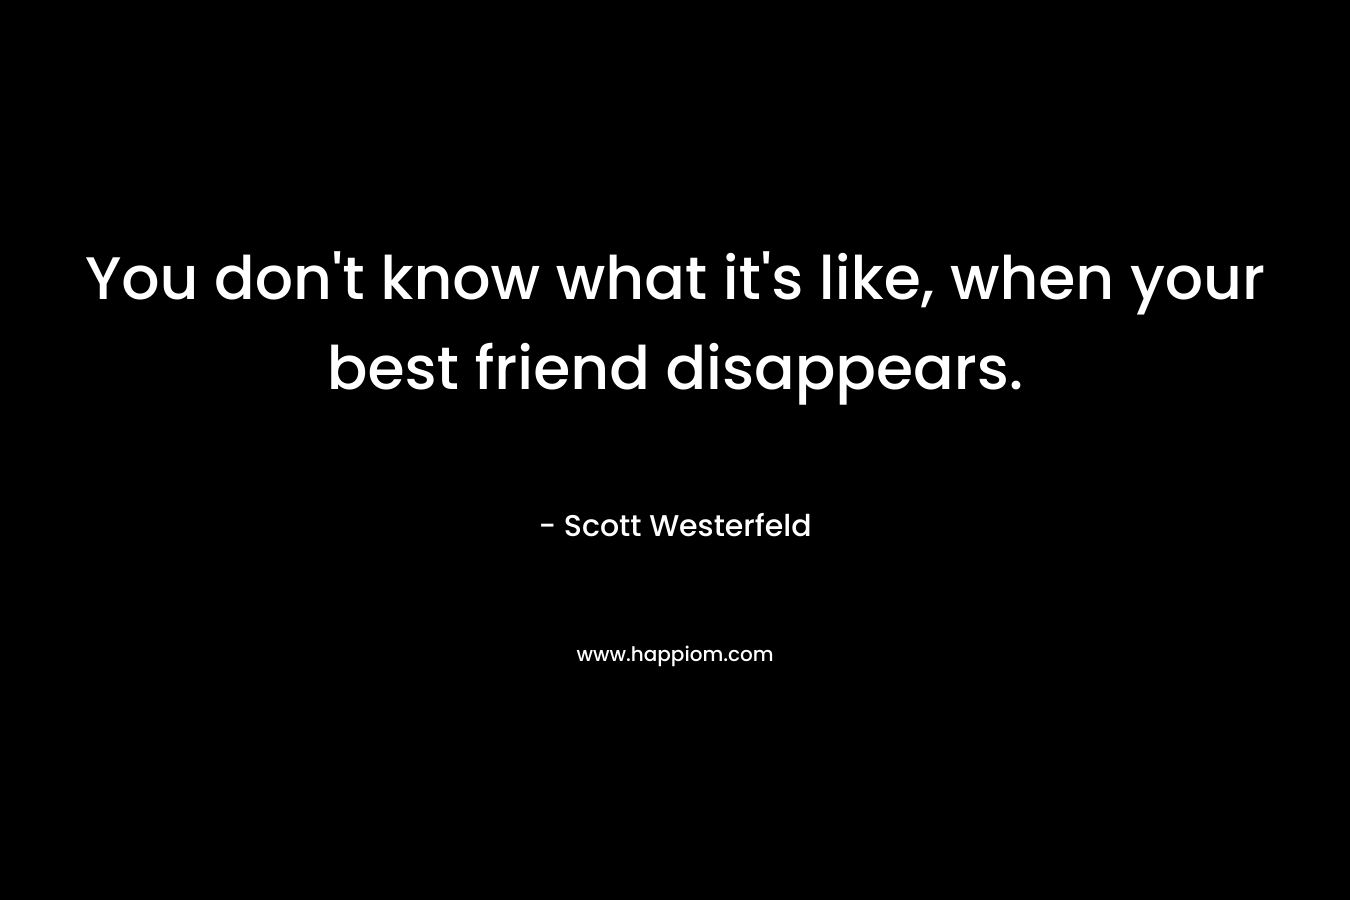 You don't know what it's like, when your best friend disappears.